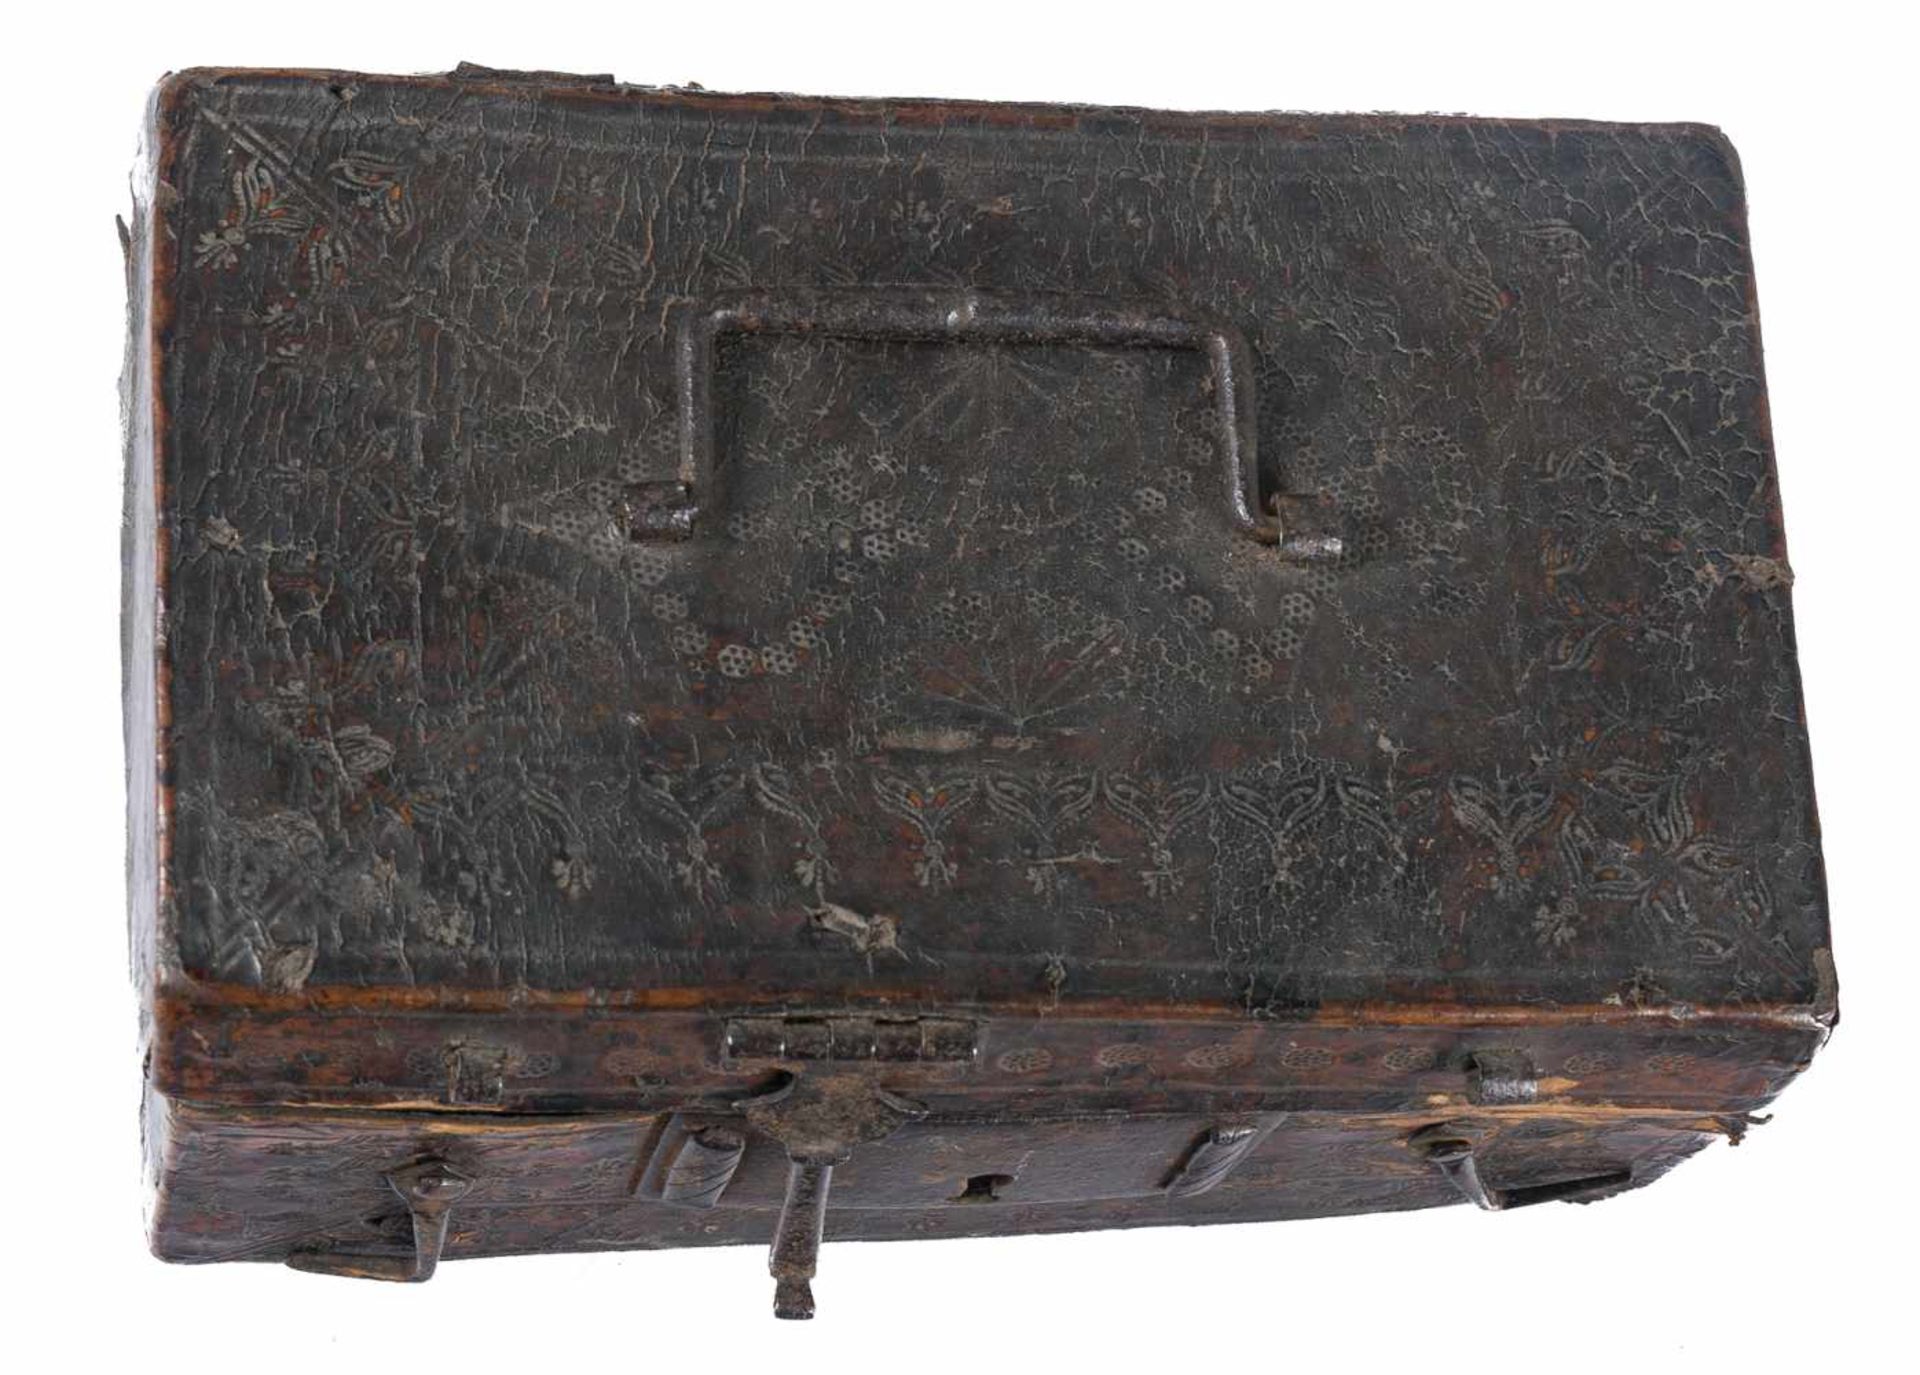 Engraved cordovan leather chest with iron fittings and wooden base. 15th century. ↵↵Flaws. 9 x 18 - Bild 5 aus 5